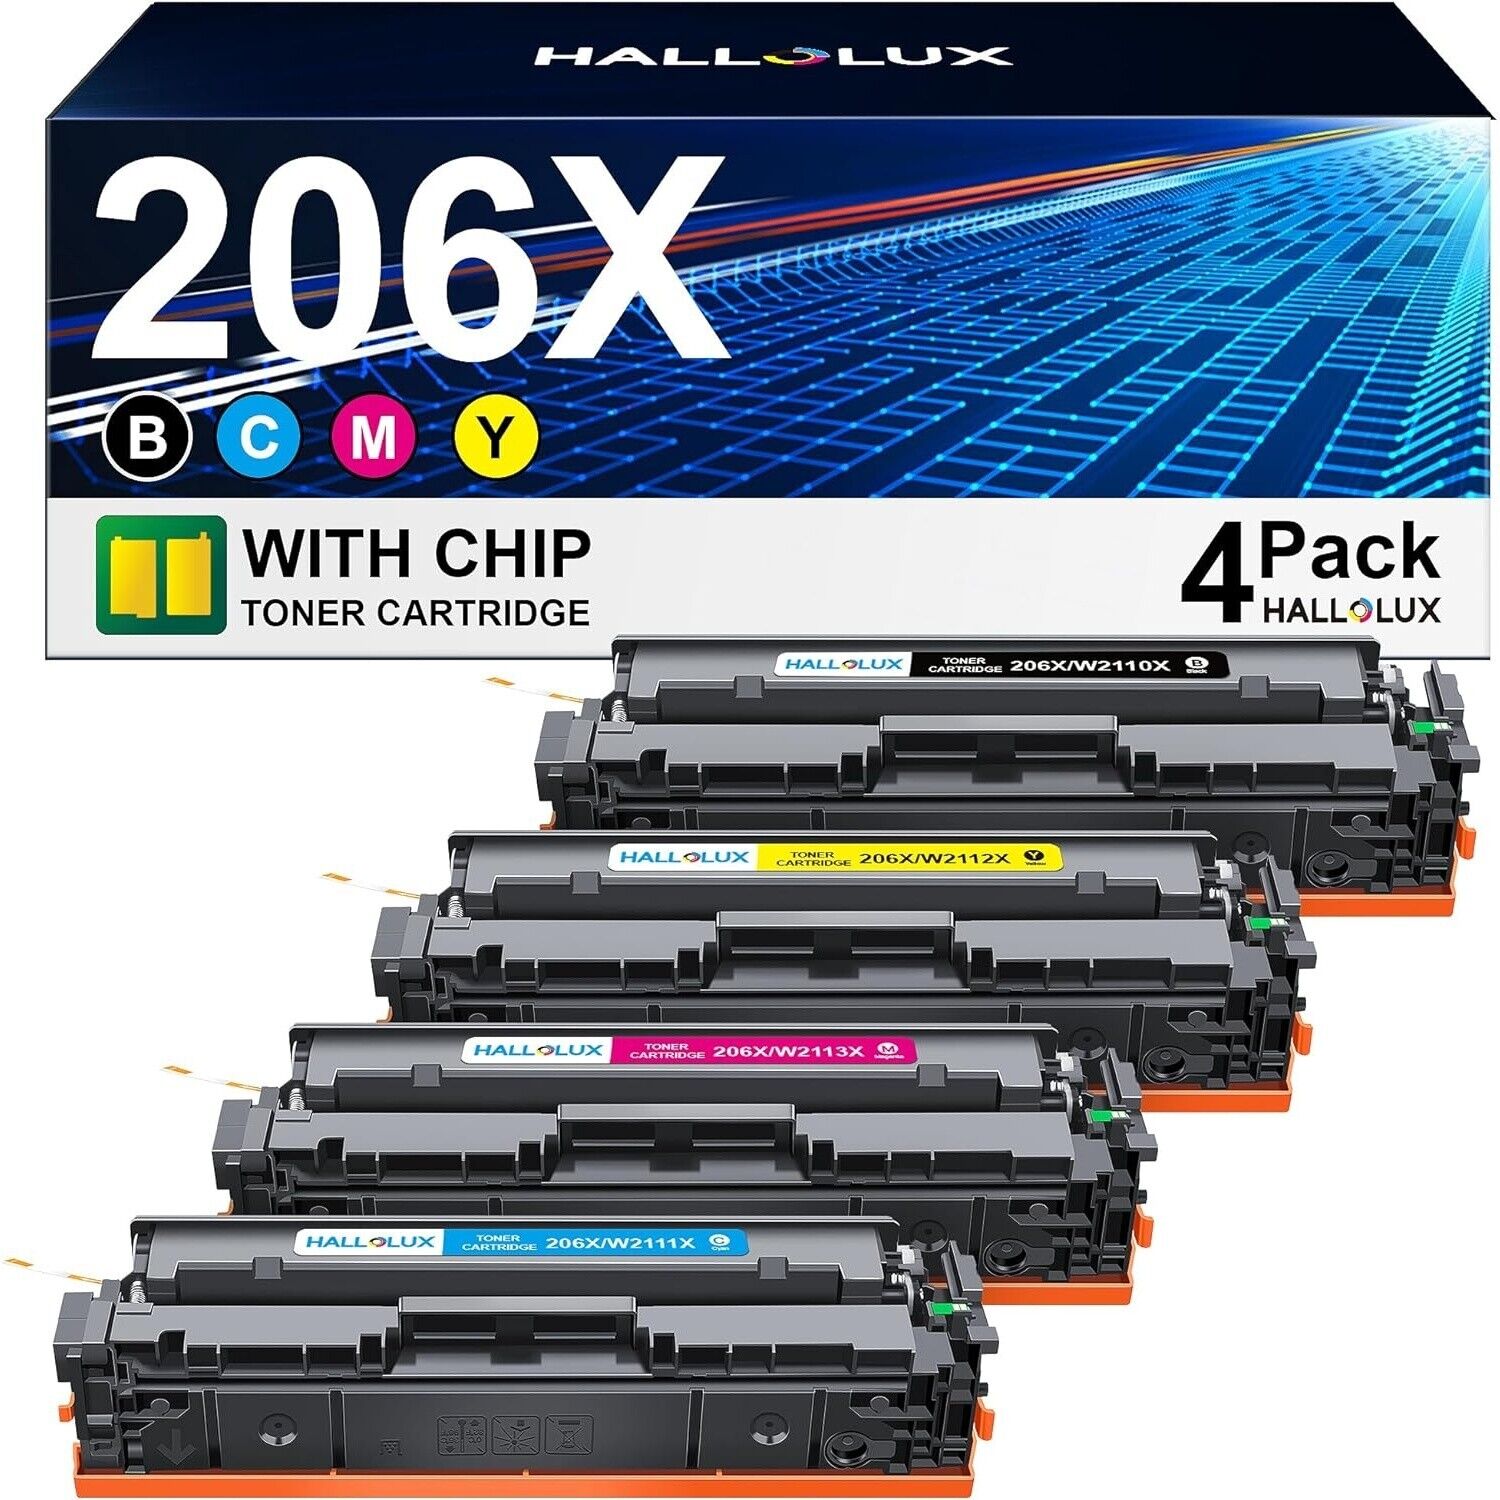 4 Pack HALLOLUX 206X Toner Cartridges (with Chip) for HP  206A Toner Cartridge